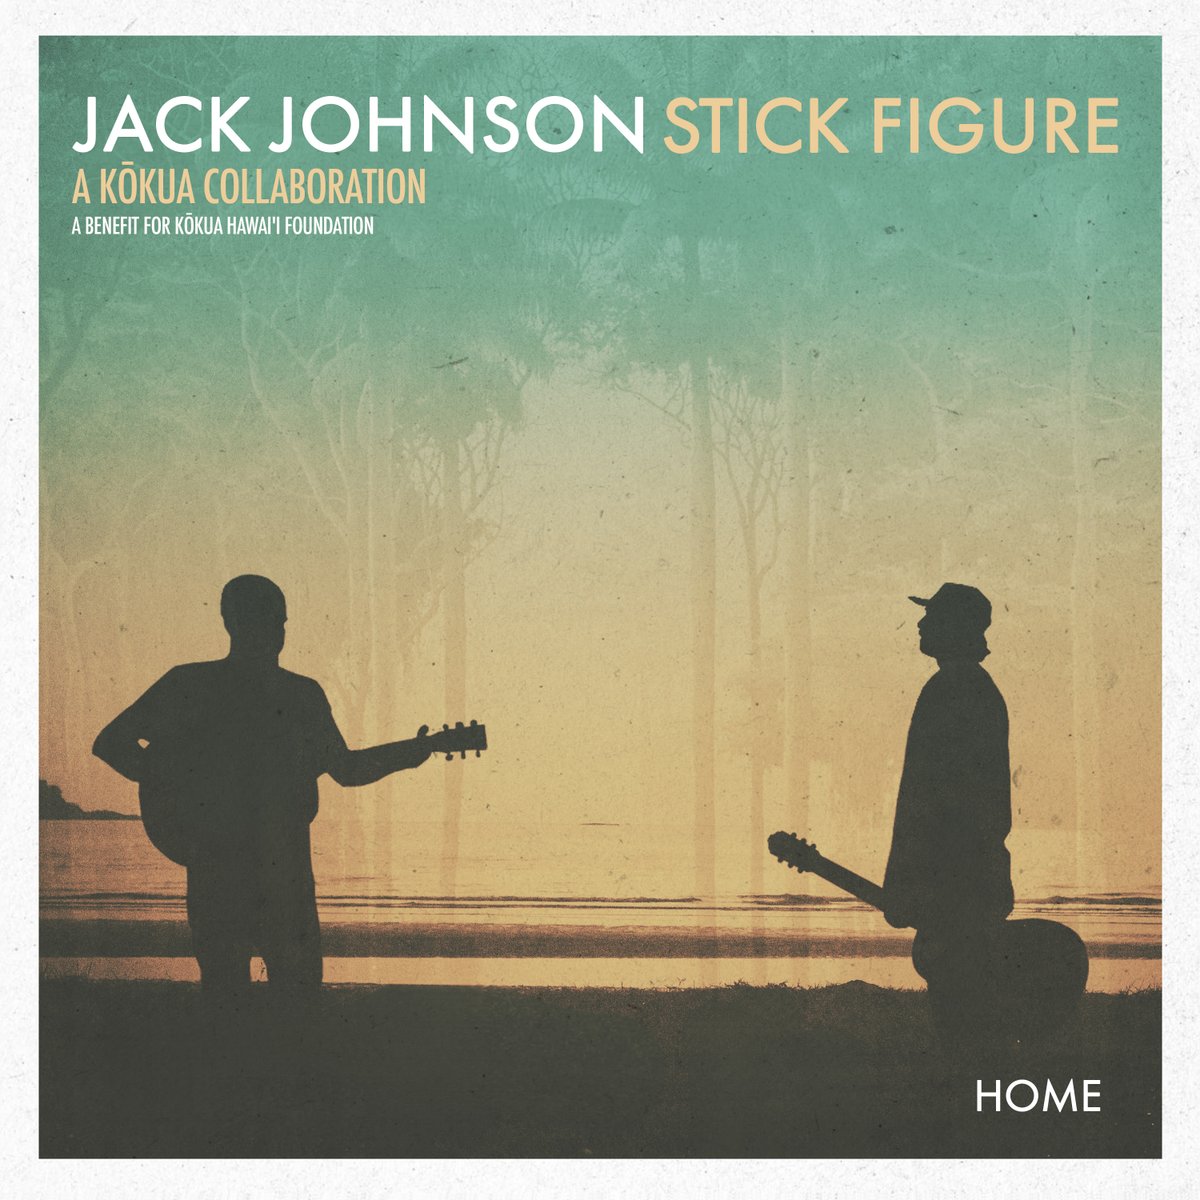 Couldn’t be more excited to announce the new Jack Johnson x Stick Figure collaboration, “Home.” What a massive honor it is to collaborate with the man himself, @jackjohnson & I cannot wait for you all to hear this one! 🌙 Out everywhere next week, April 26th! 🤙🏽